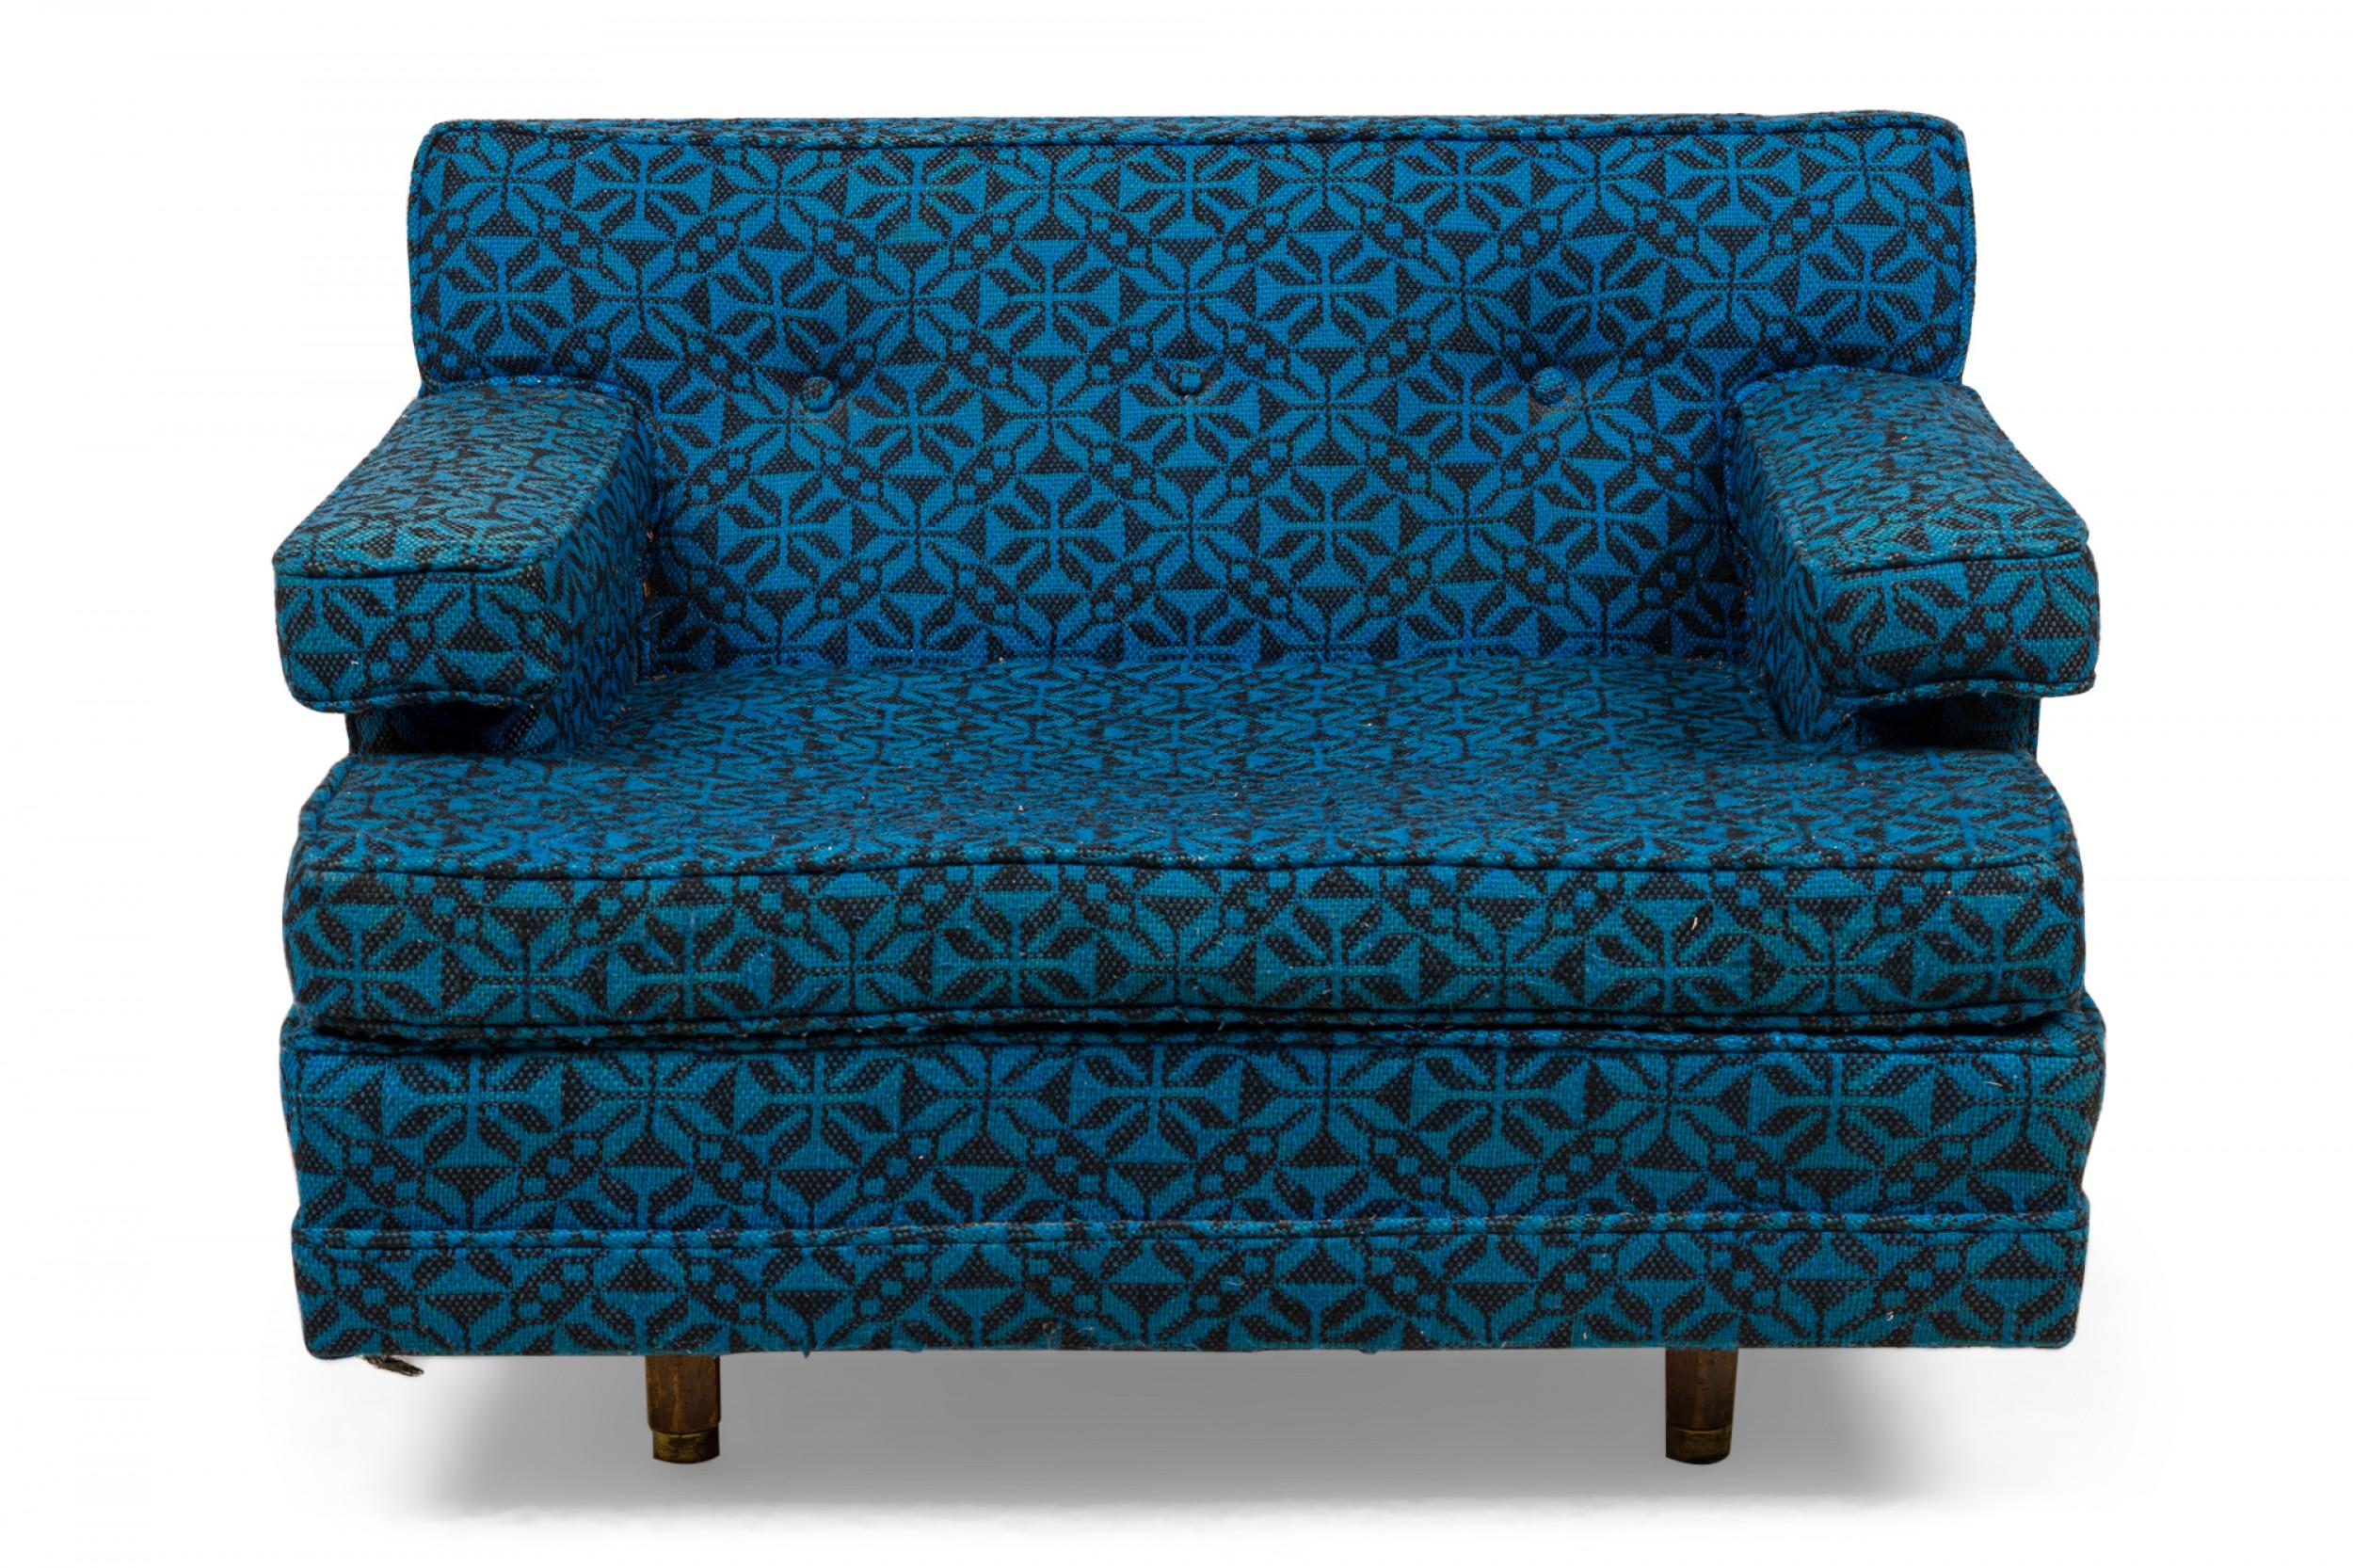 American Mid-Century oversized lounge / armchair upholstered in a bright. and dark blue geometric patterned fabric with matching bolster/back pillow. (HARVEY PROBBER)
 